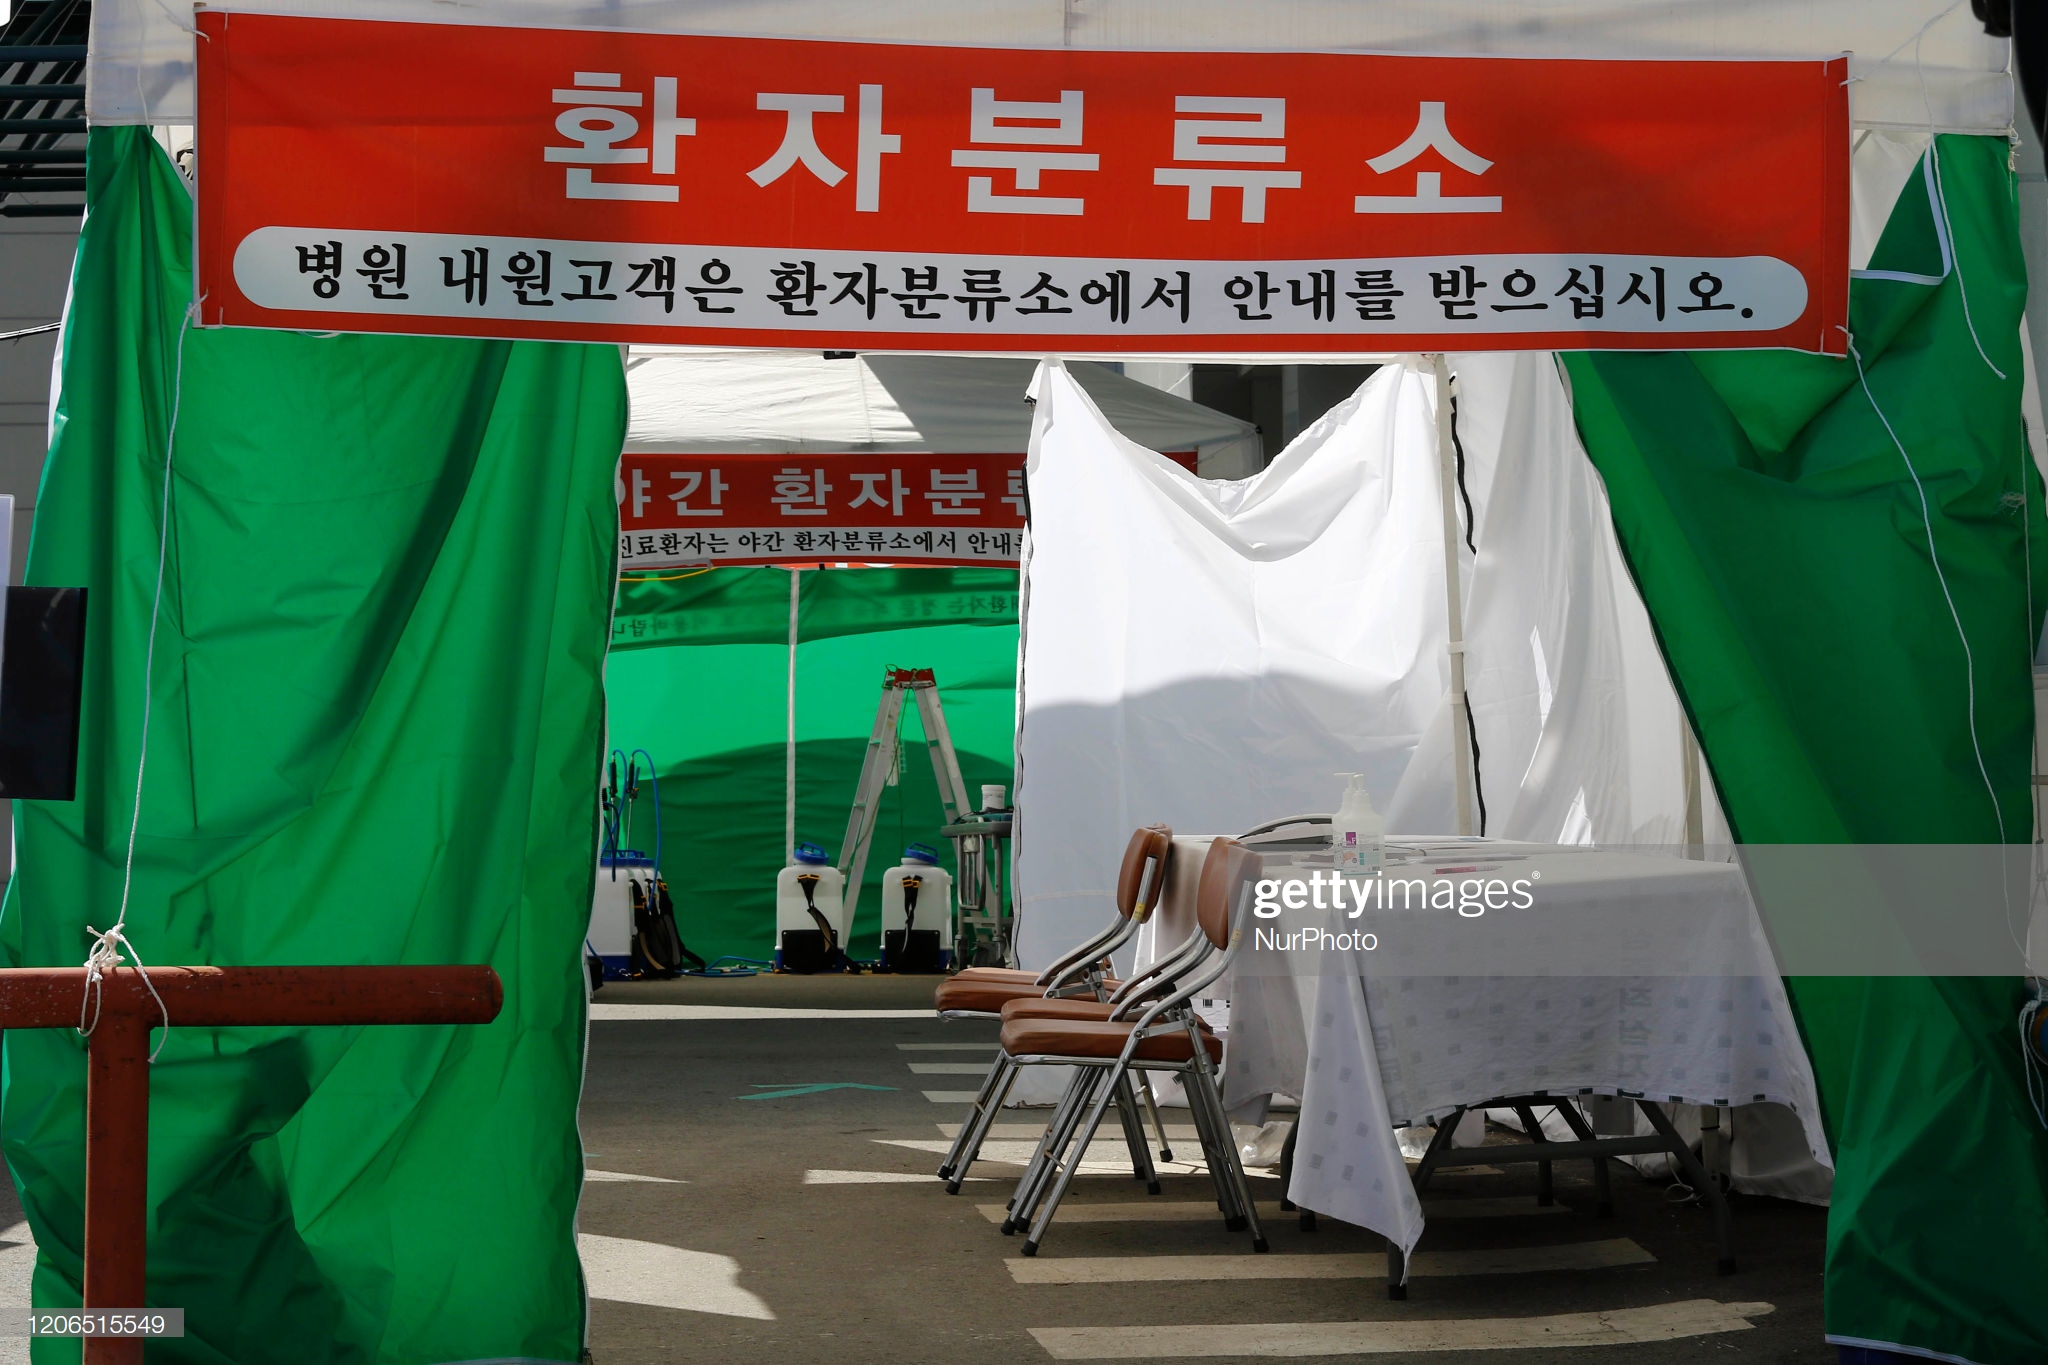 empty-covid19-check-post-at-red-cross-hospital-in-sangju-south-korea-picture-id1206515549